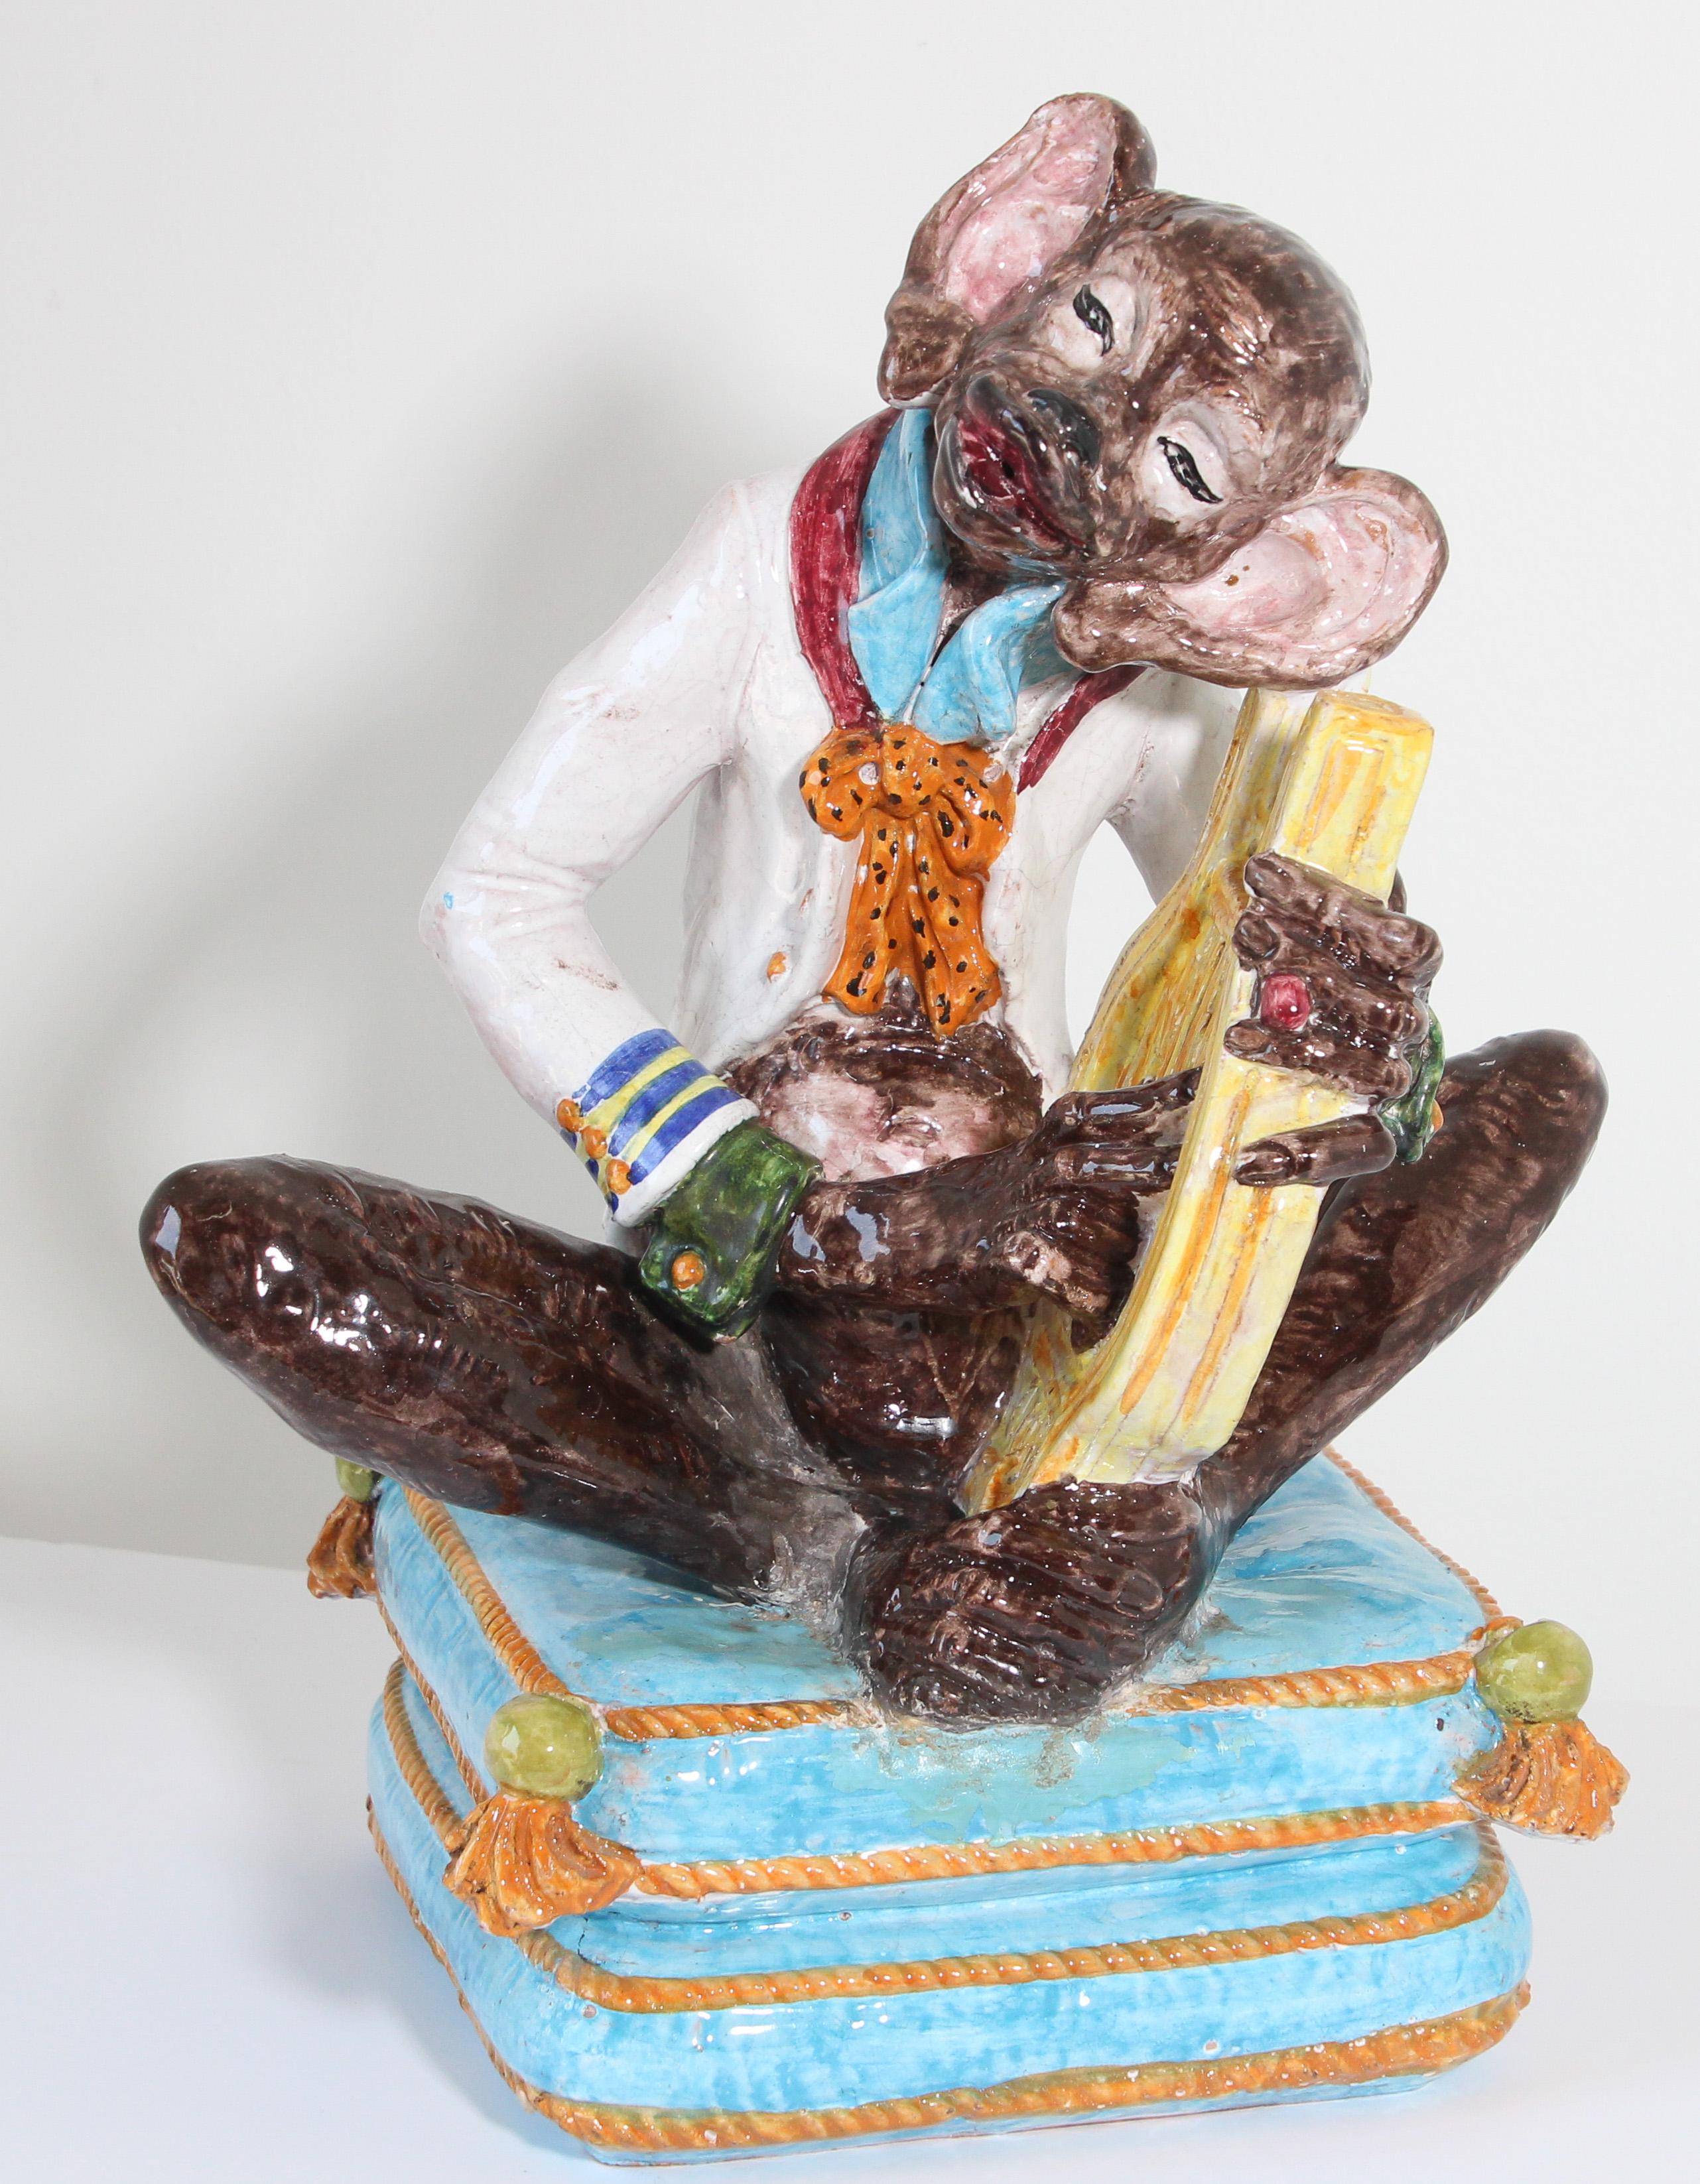 Large Enchanting French Victorian style multicolored Majolica terra cotta figure of a monkey sculpture dressed up playing the harp seated on a double turquoise tasselled floor pillows with beautiful detail throughout.
Heavy pottery with gloss